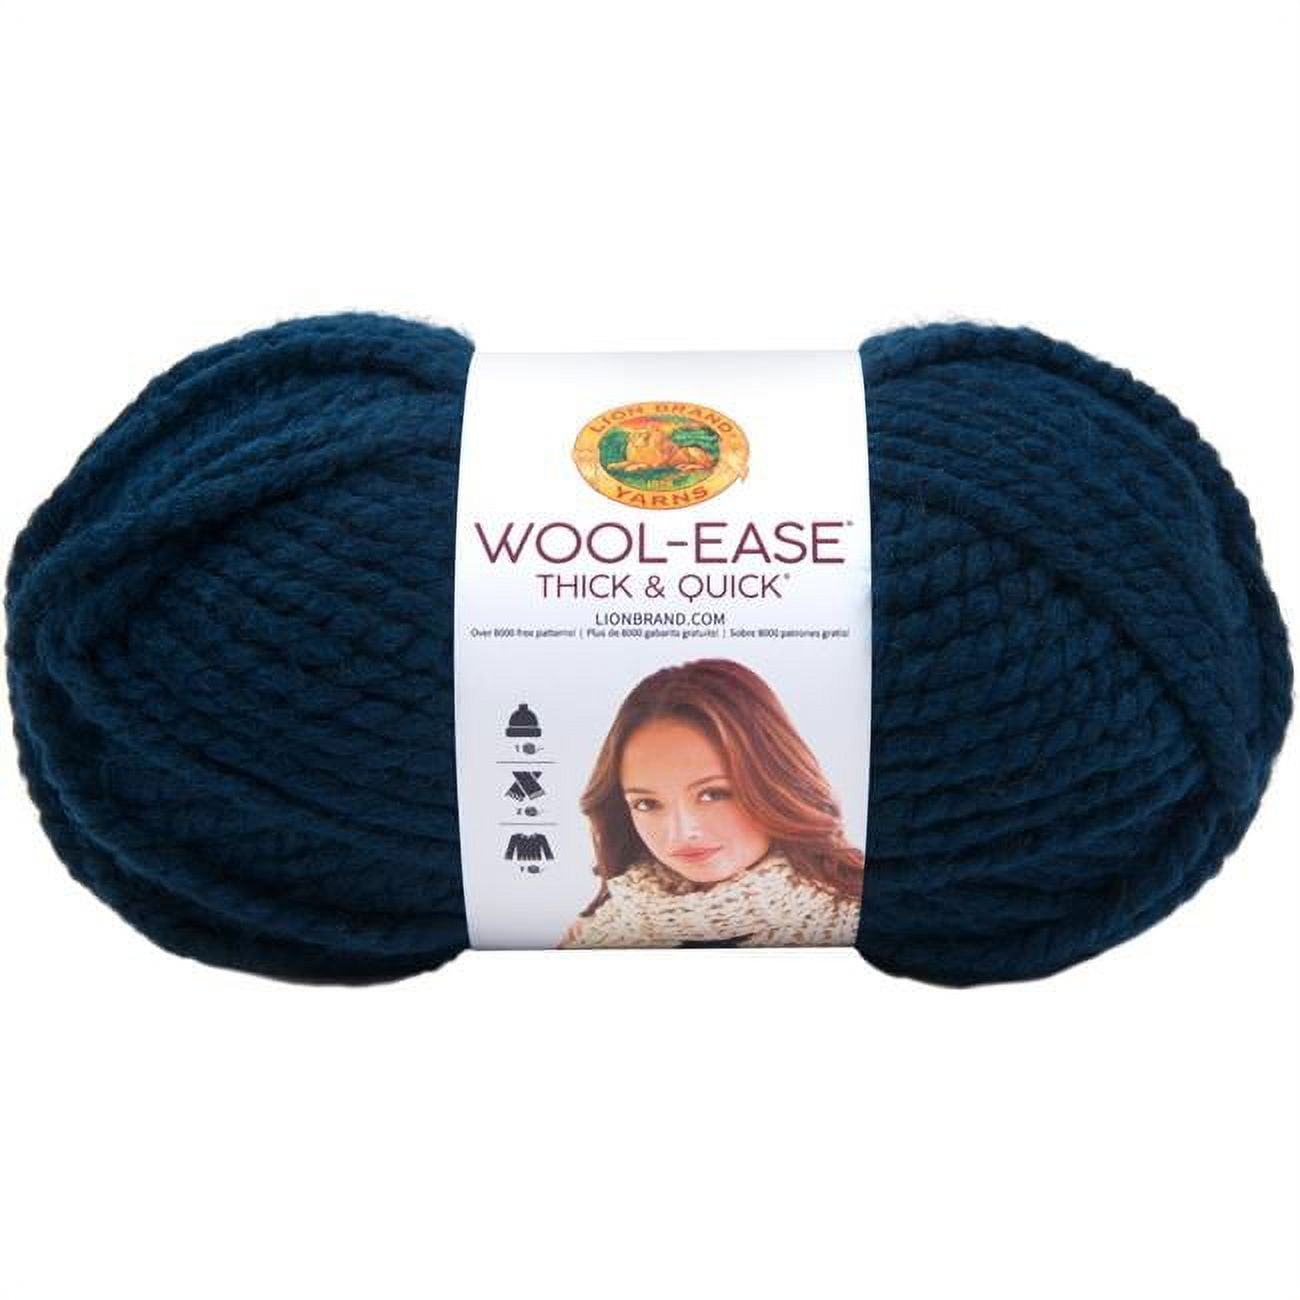 Lion Brand Wool-Ease Thick & Quick Yarn-Eden, 1 count - Kroger